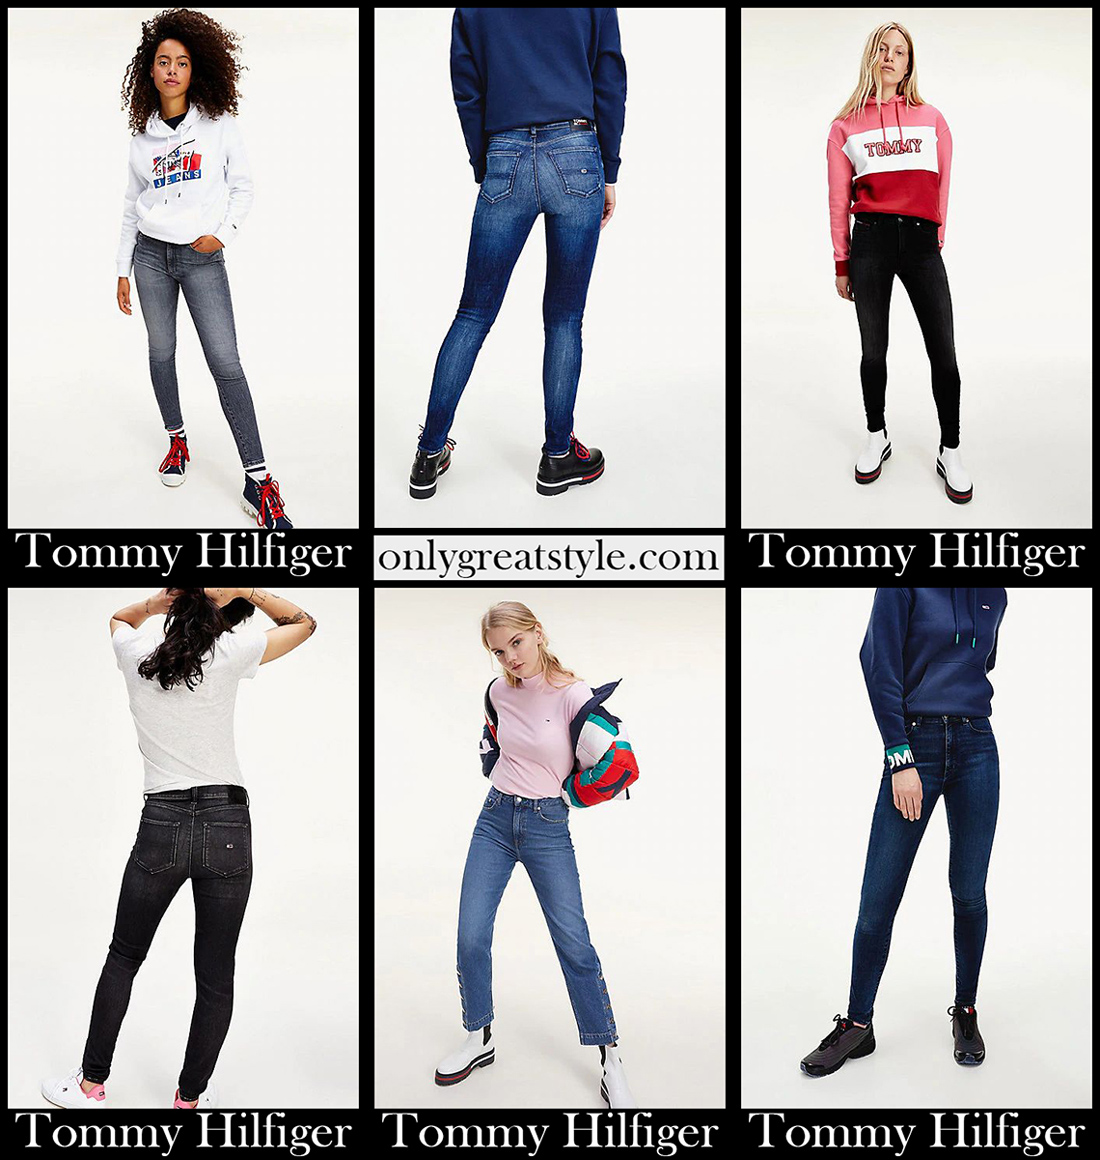 Tommy Hilfiger jeans 2021 new arrivals womens clothing